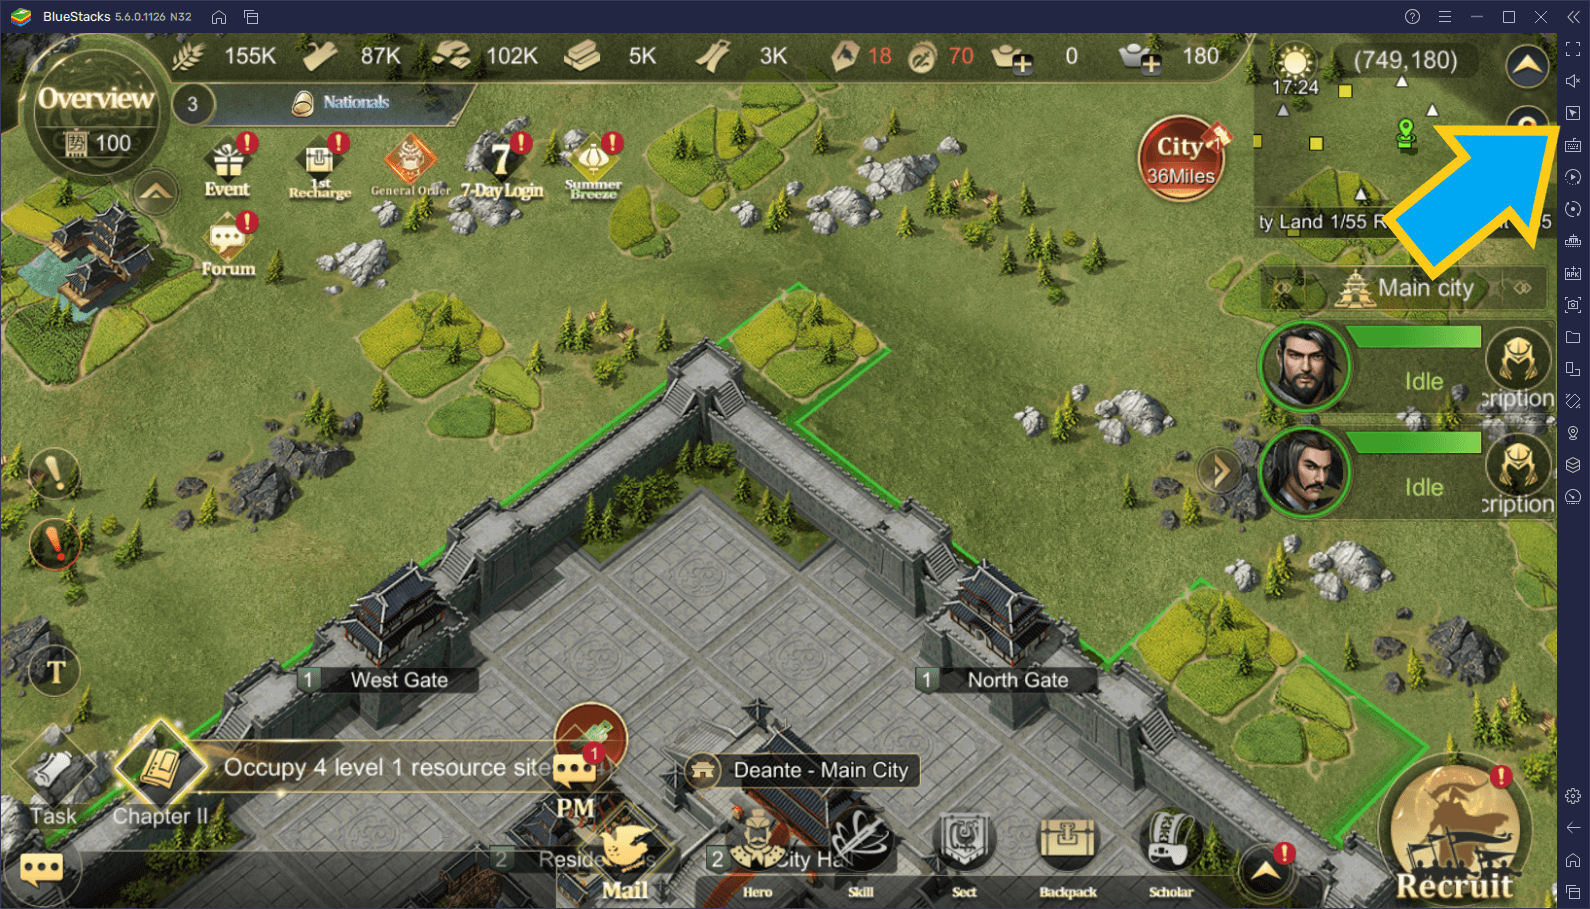 The Qin Empire on PC - How to Use BlueStacks to Develop Your Empire and Conquer Your Enemies